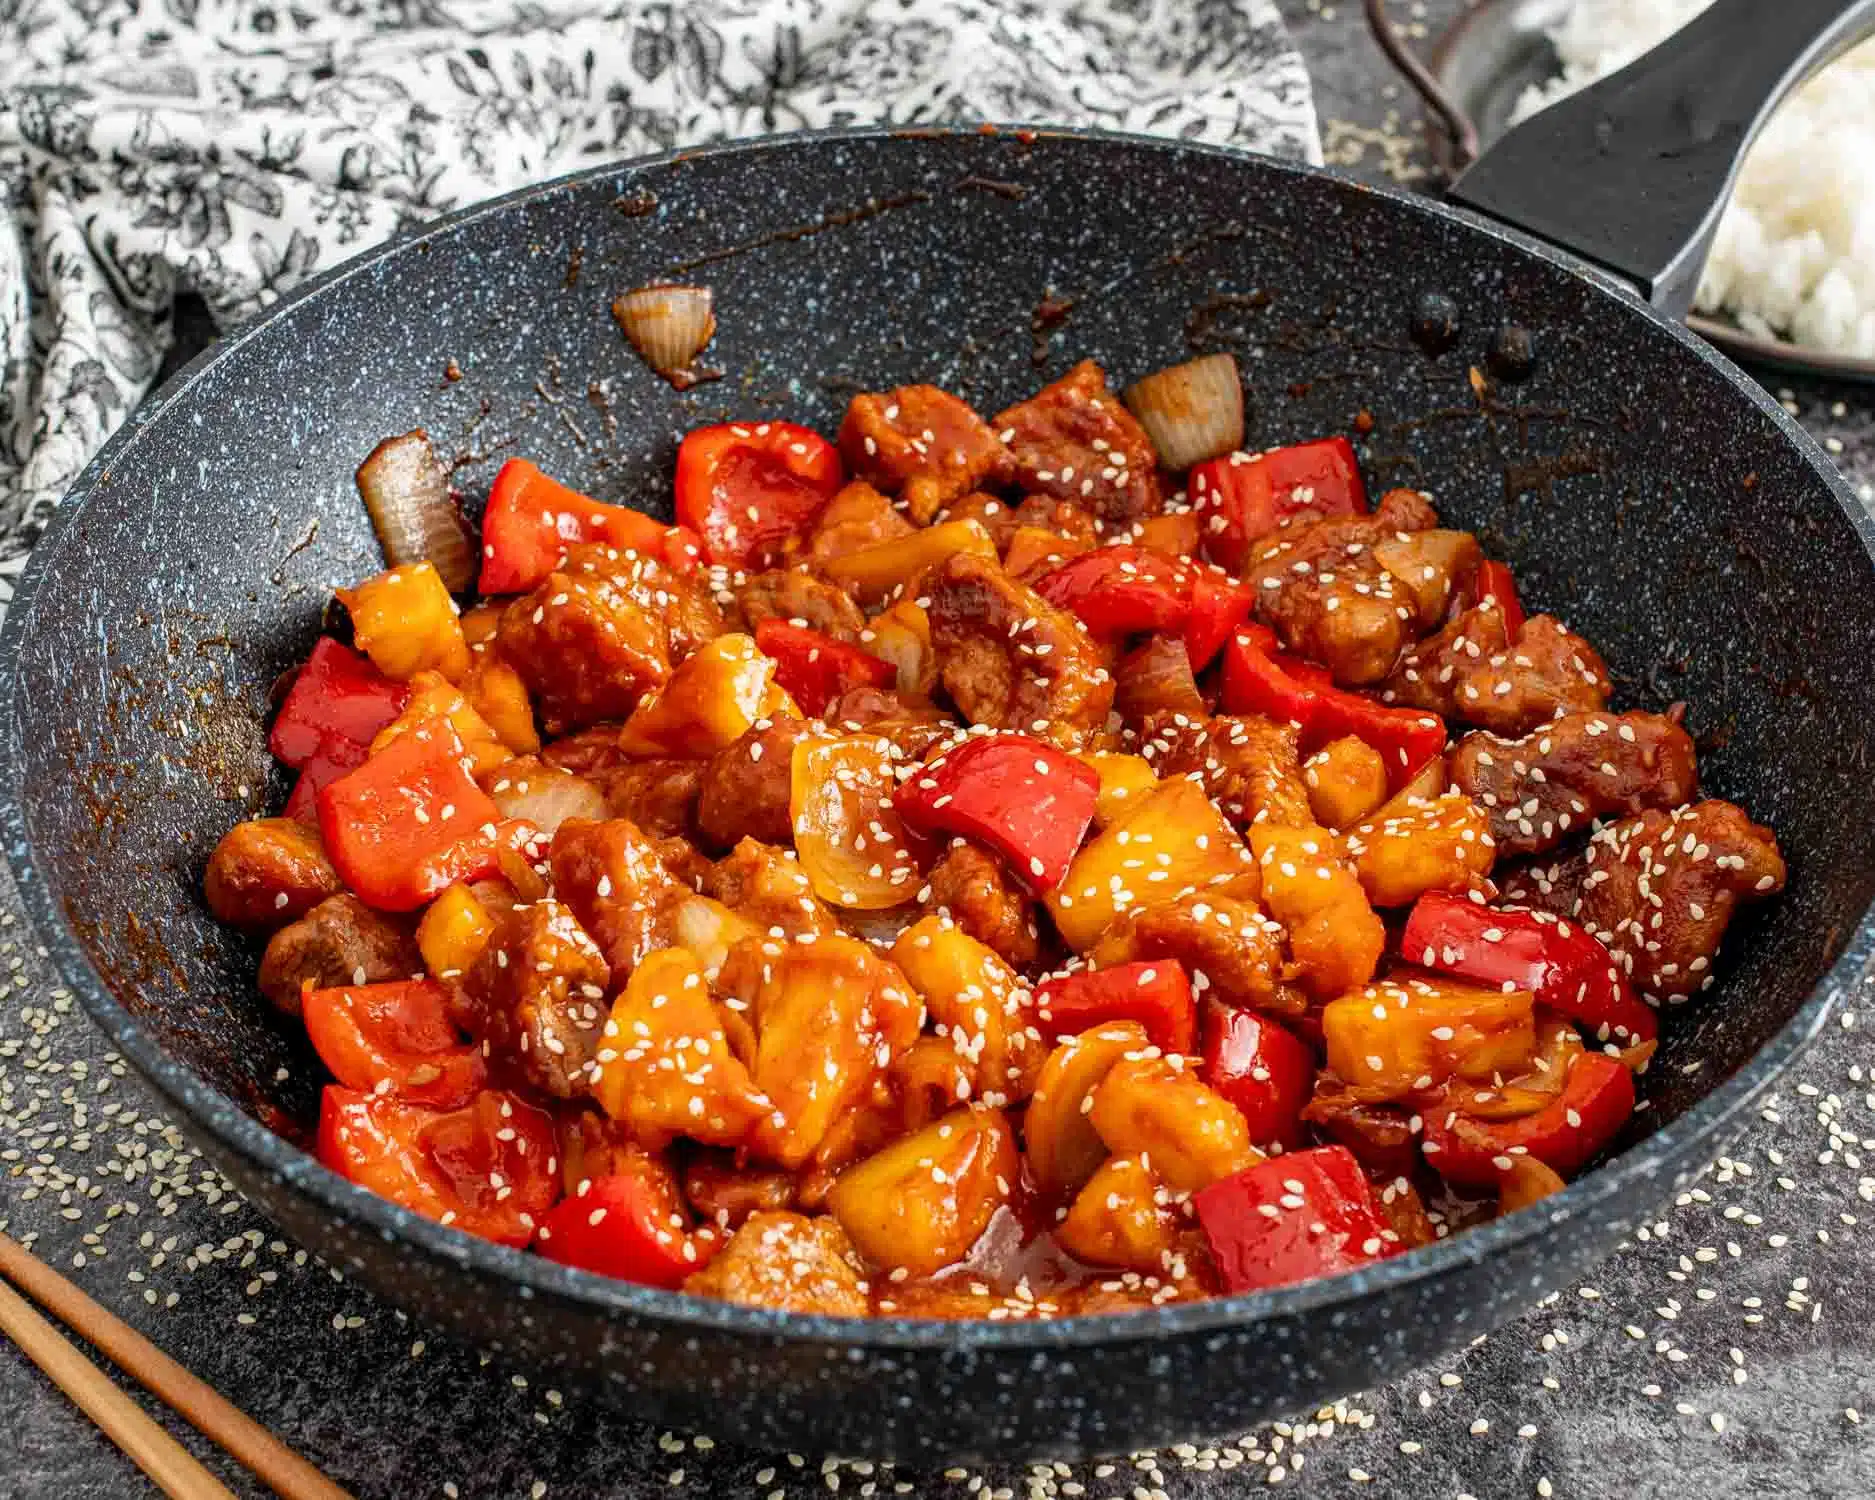 freshly made sweet and sour pork in a wok.